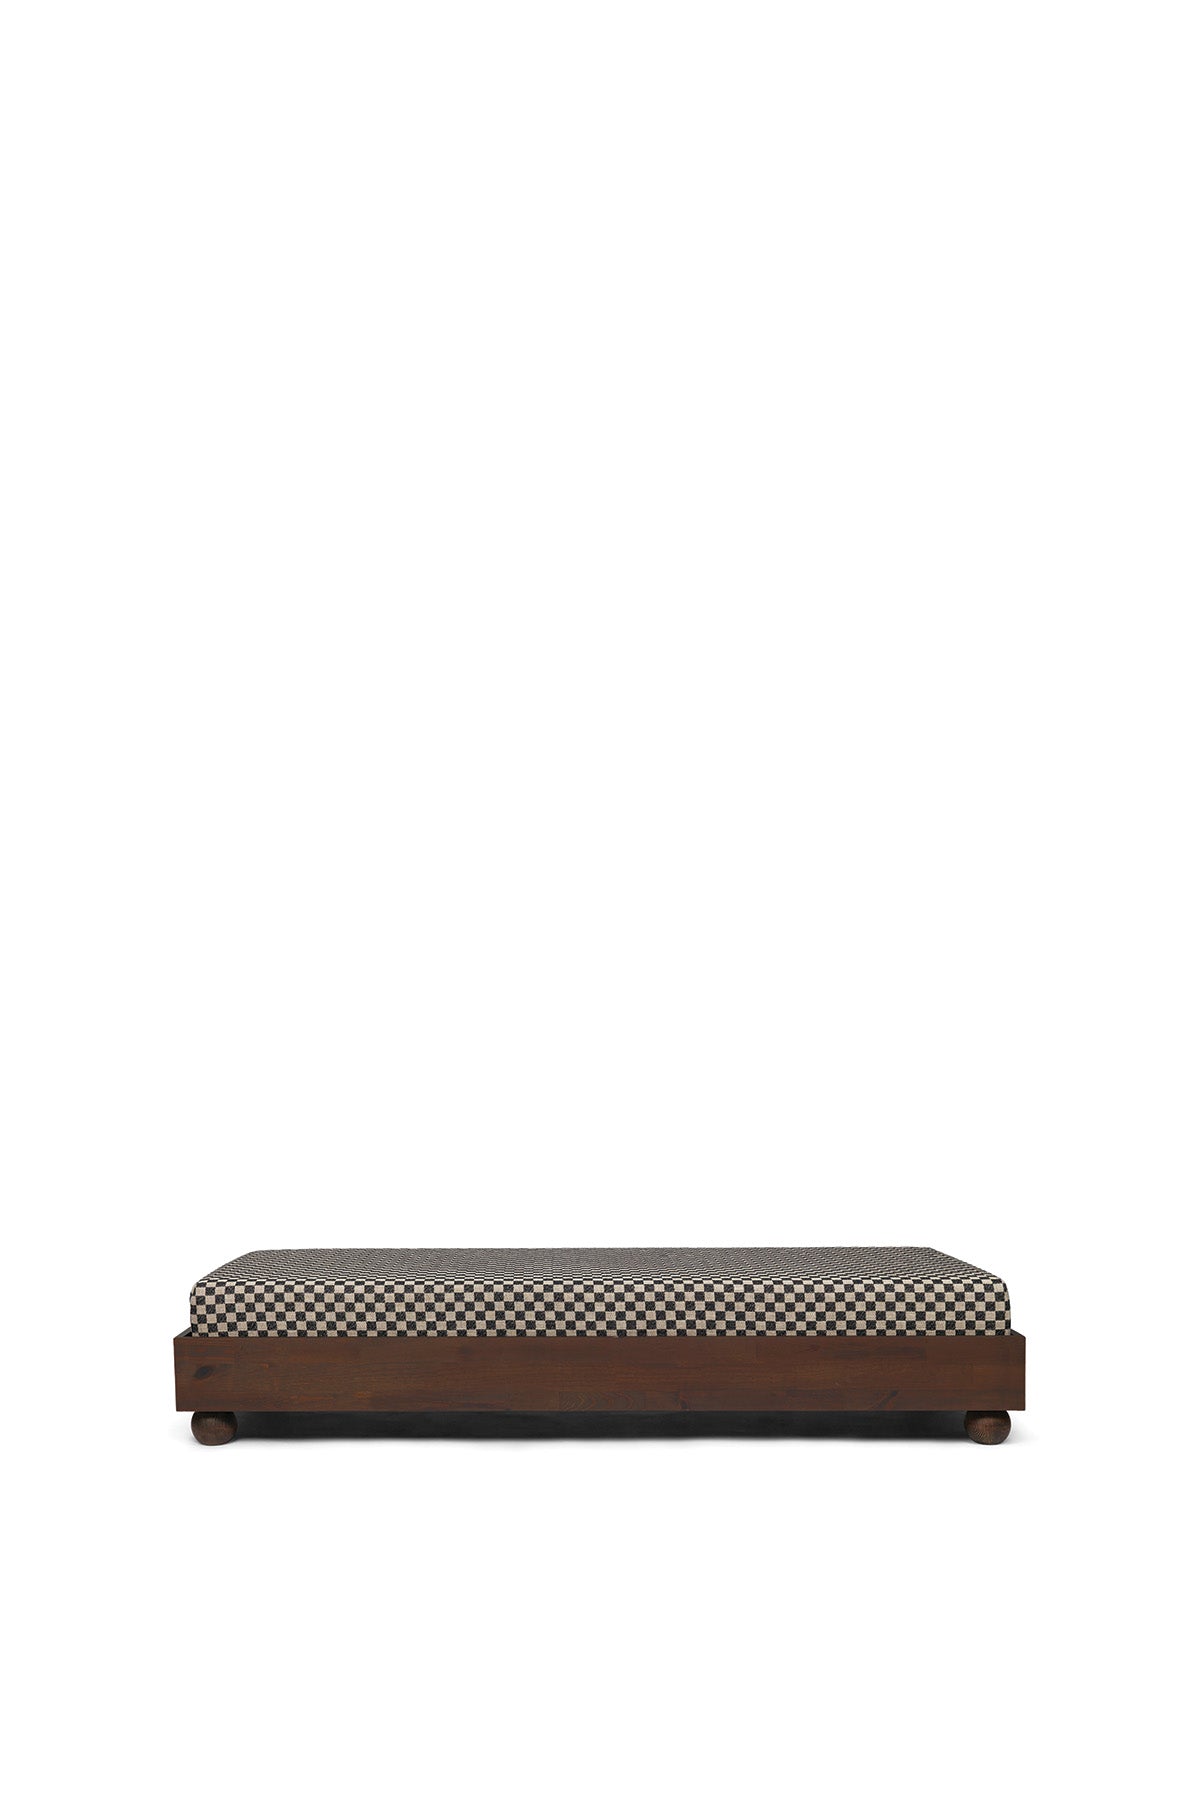 Ferm Living Rum Daybed - Check - Marz DesignsFerm Living